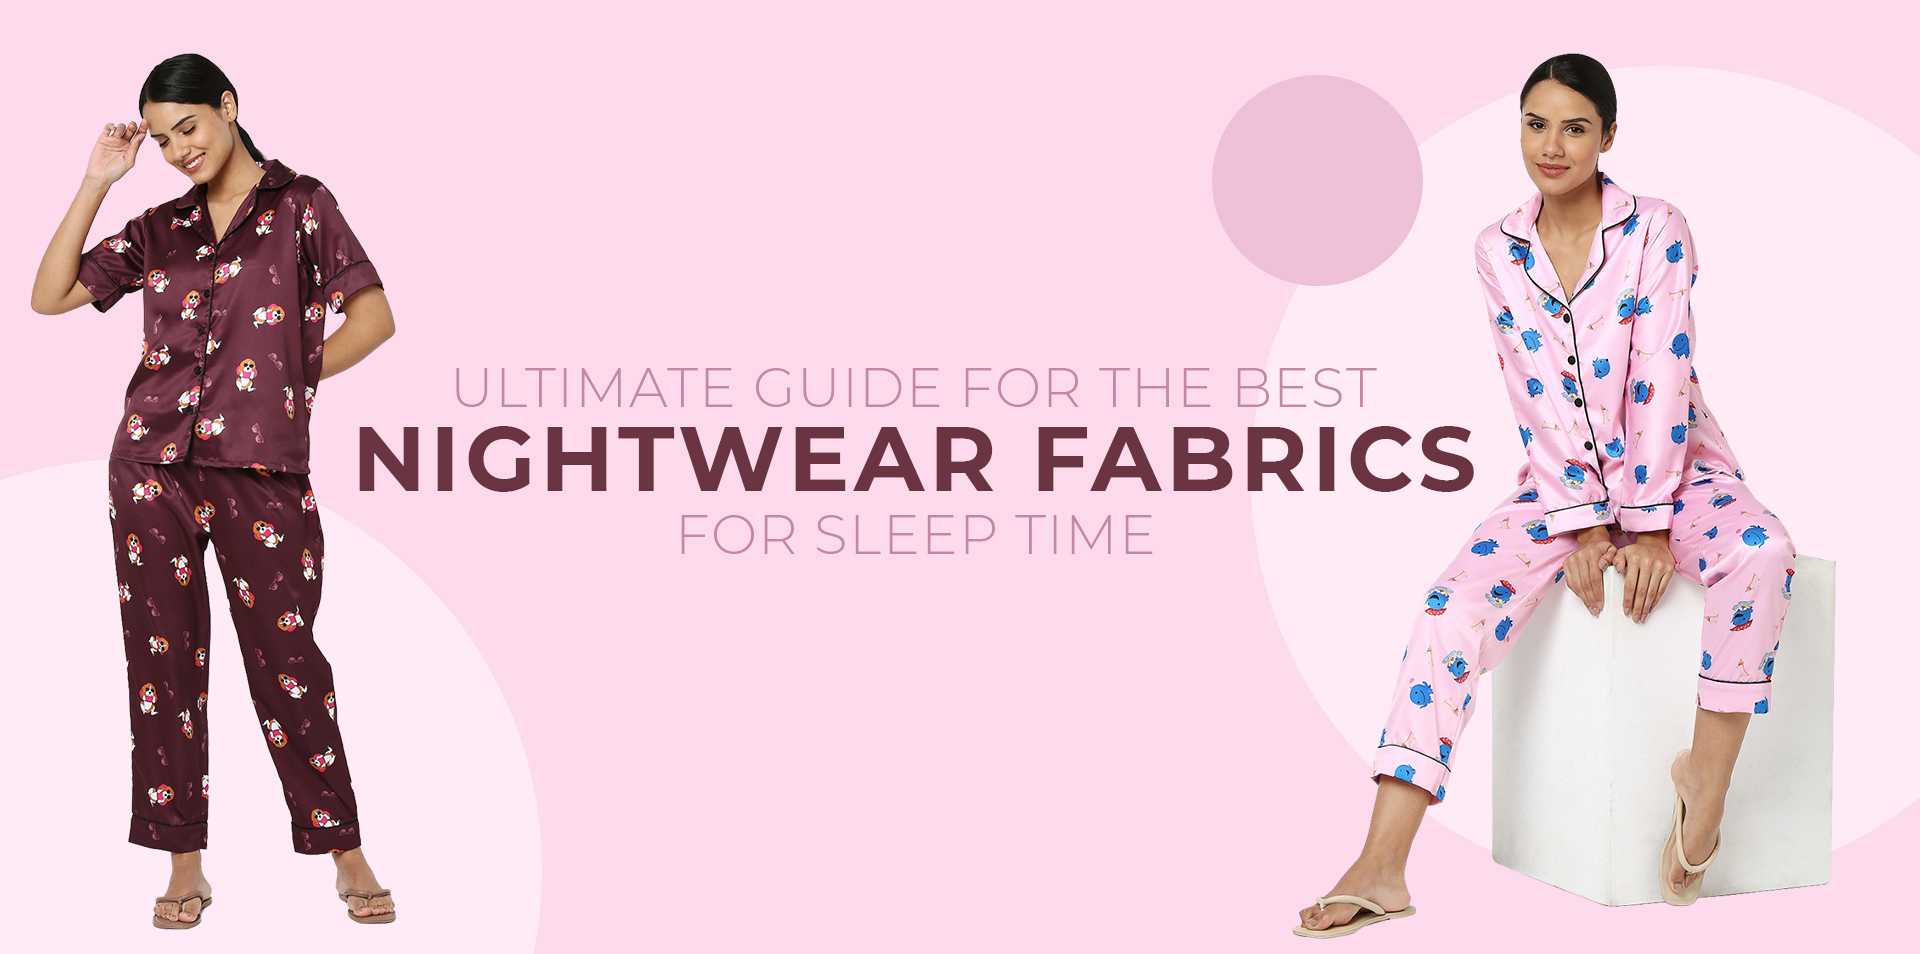 Ultimate Guide for the Best Nightwear Fabrics for Sleep Time